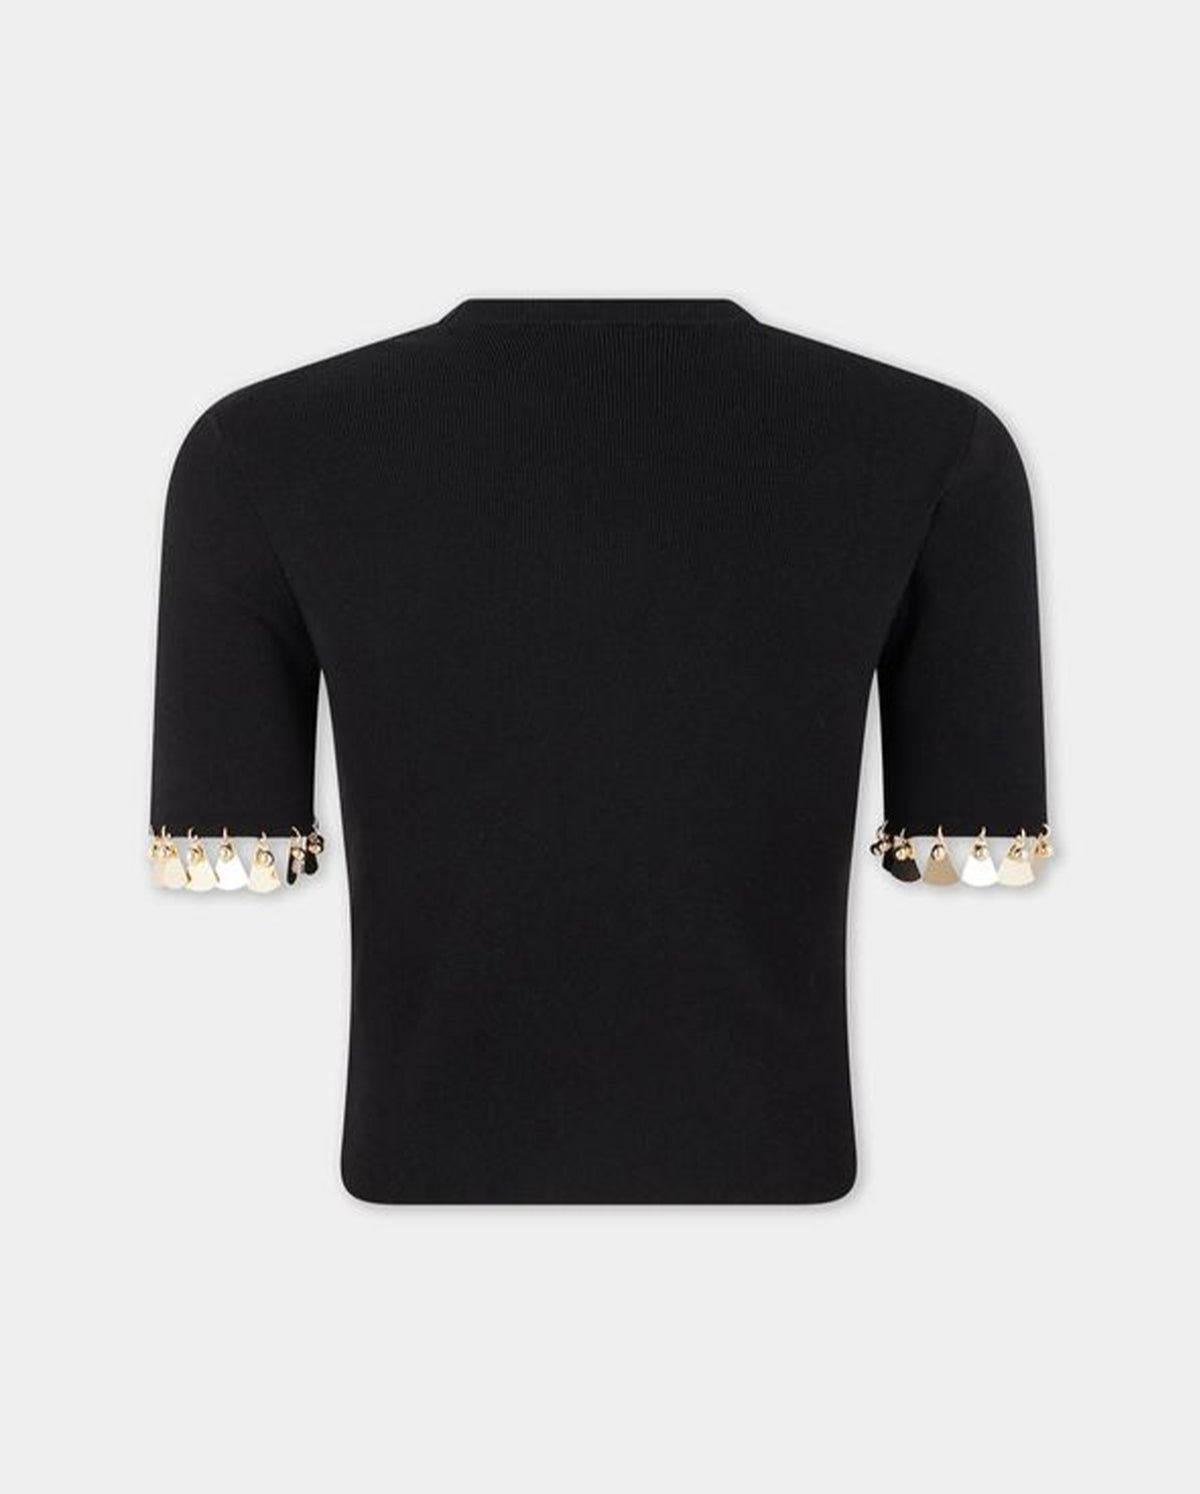 Black Top With Gold Stud Sleeve